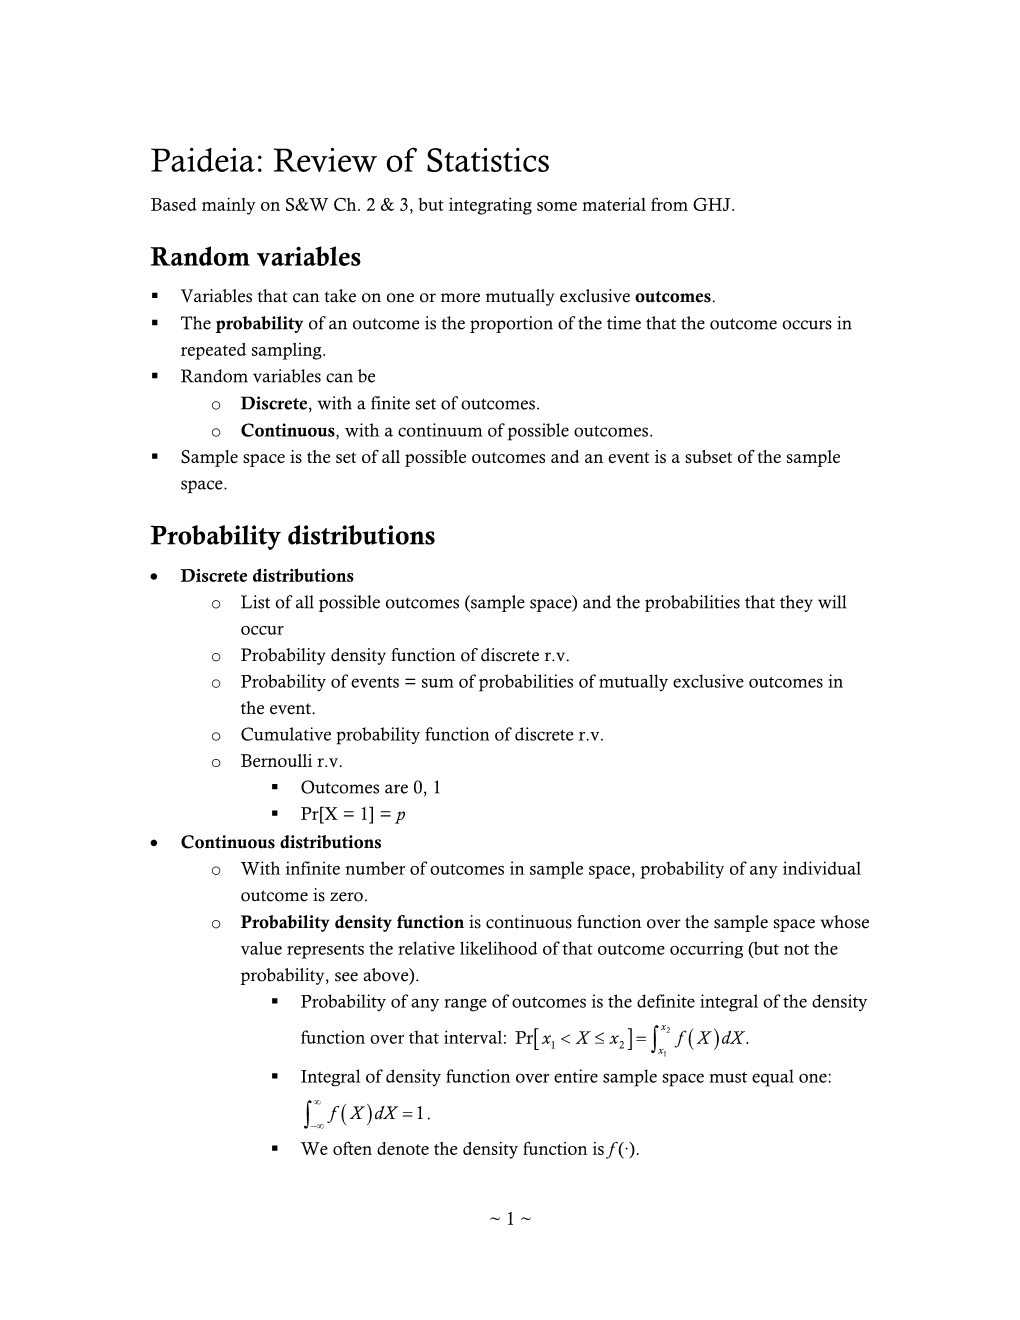 Paideia: Review of Statistics Based Mainly on S&W Ch